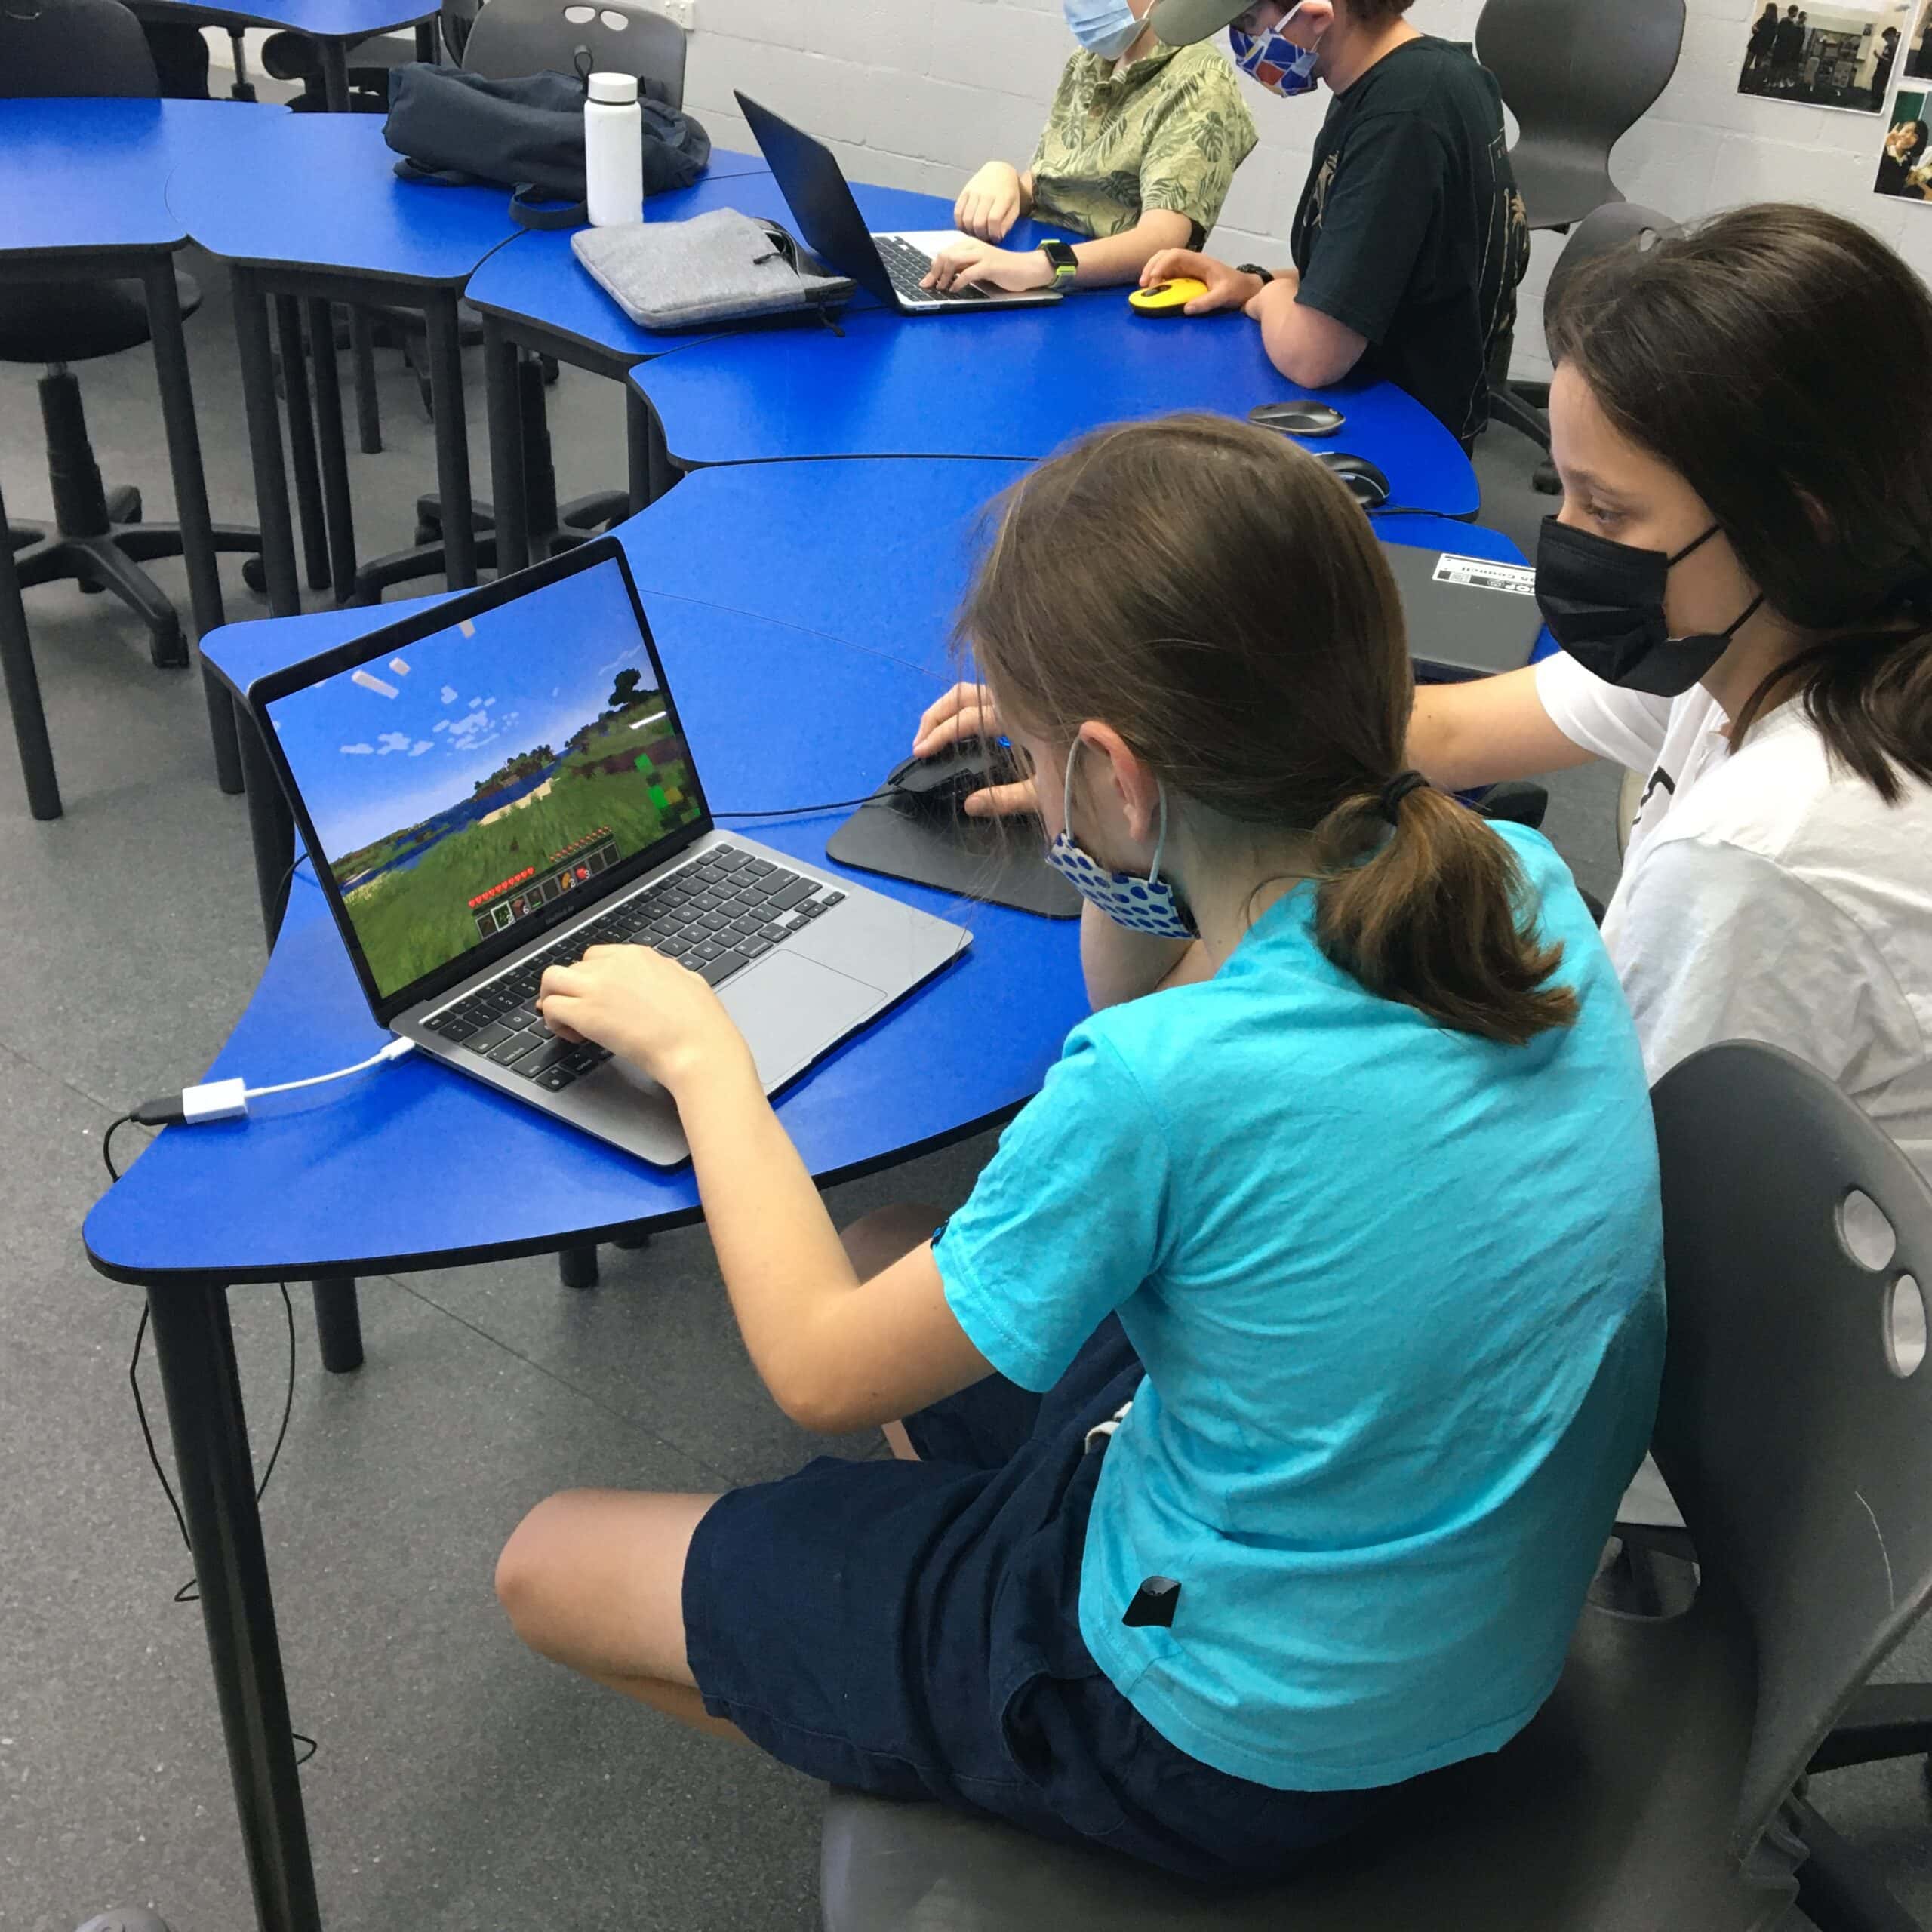 Students collaborate as they play Minecraft